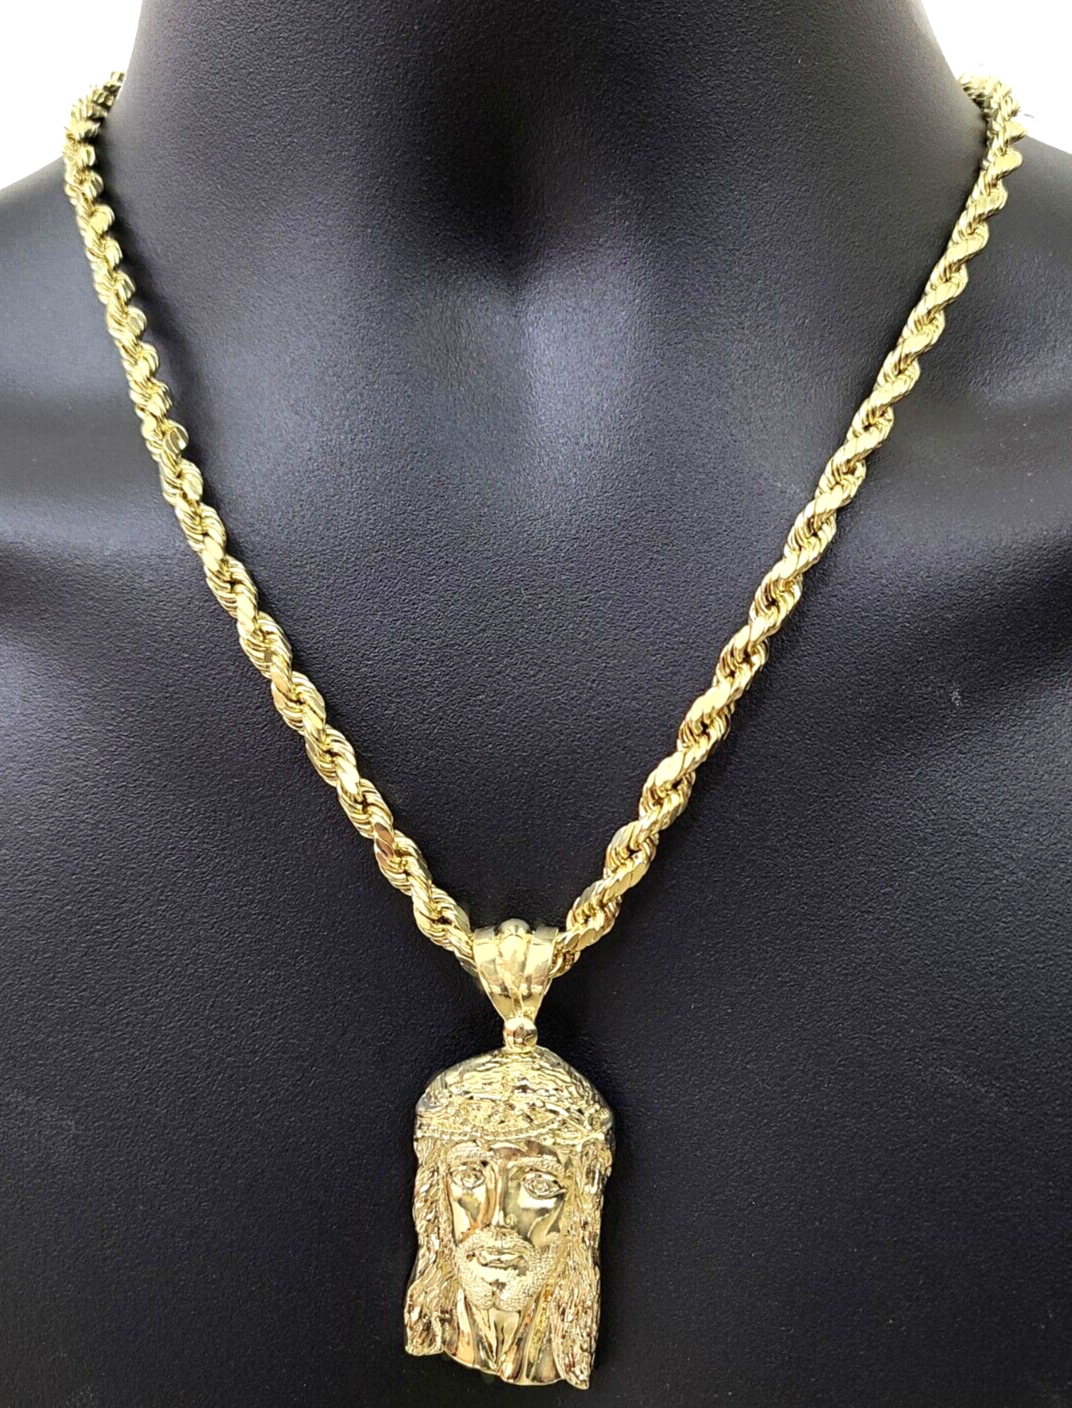 10K Gold Jesus Head Charm Rope Chain Necklace 6mm 24'' Set & Pendant 10kt Real